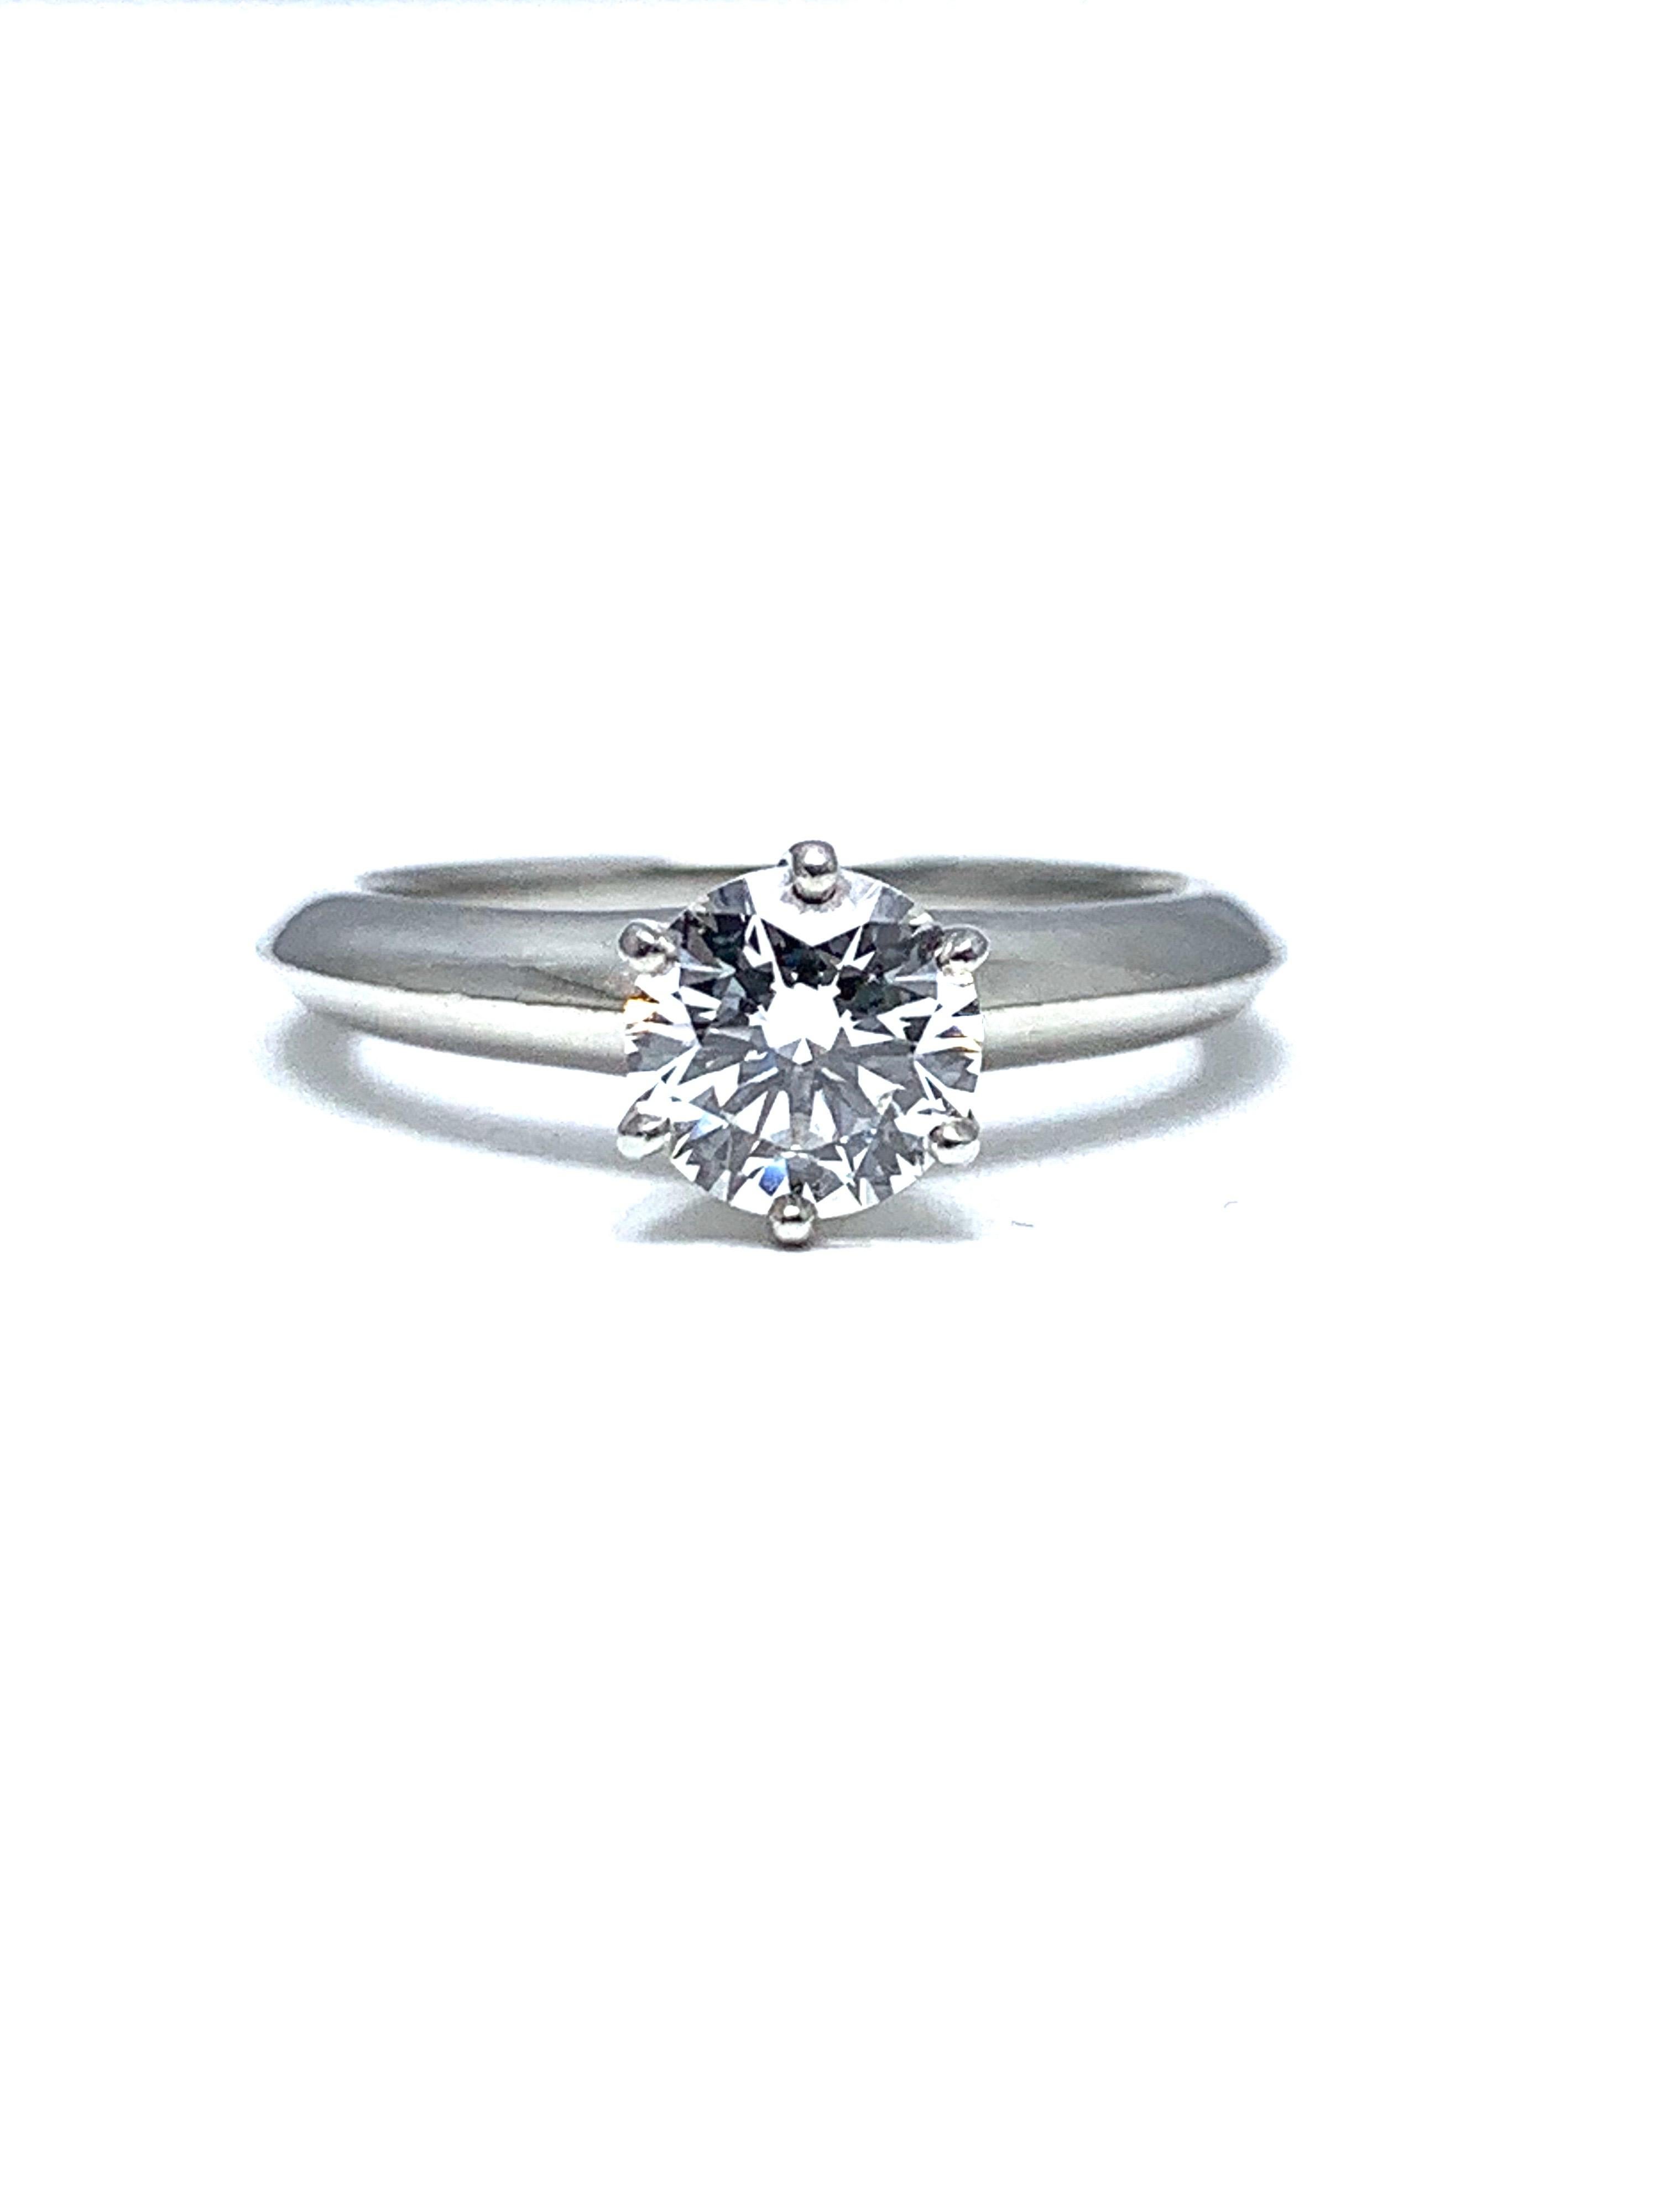 A stunning Tiffany & Co. round brilliant diamond solitaire platinum ring.  the diamond is set in a six prong head on a knife edge shank.  The diamond is 0.89cts, E color, VS1 clarity.  

Signature:  Tiffany & Co.
Hallmark:  PT950
Inscription:  D